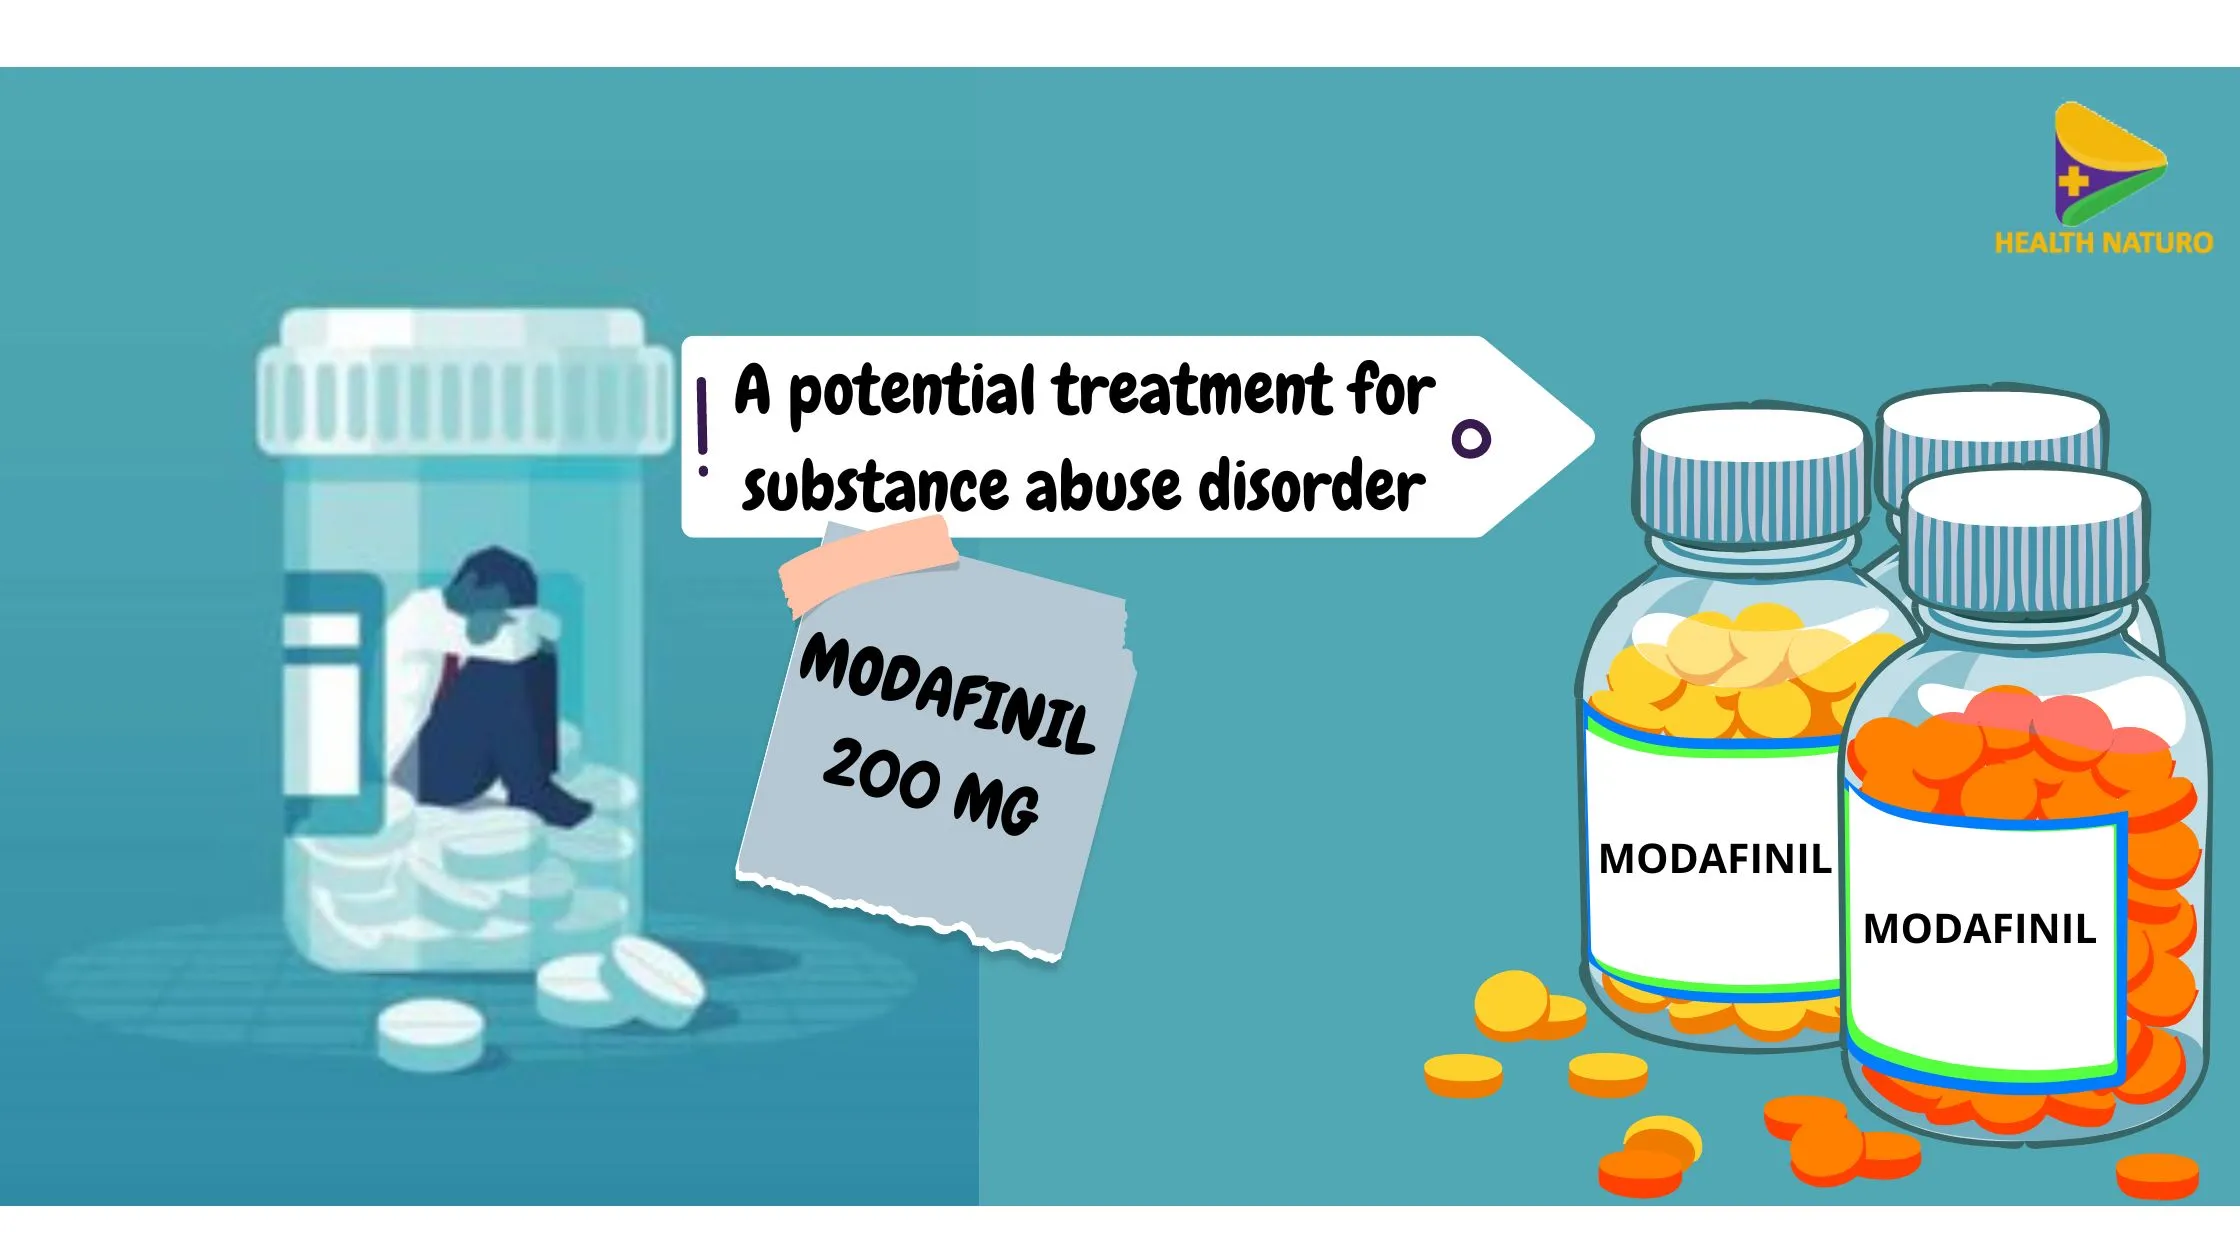 Modafinil 200mg: A potential treatment for substance abuse disorder